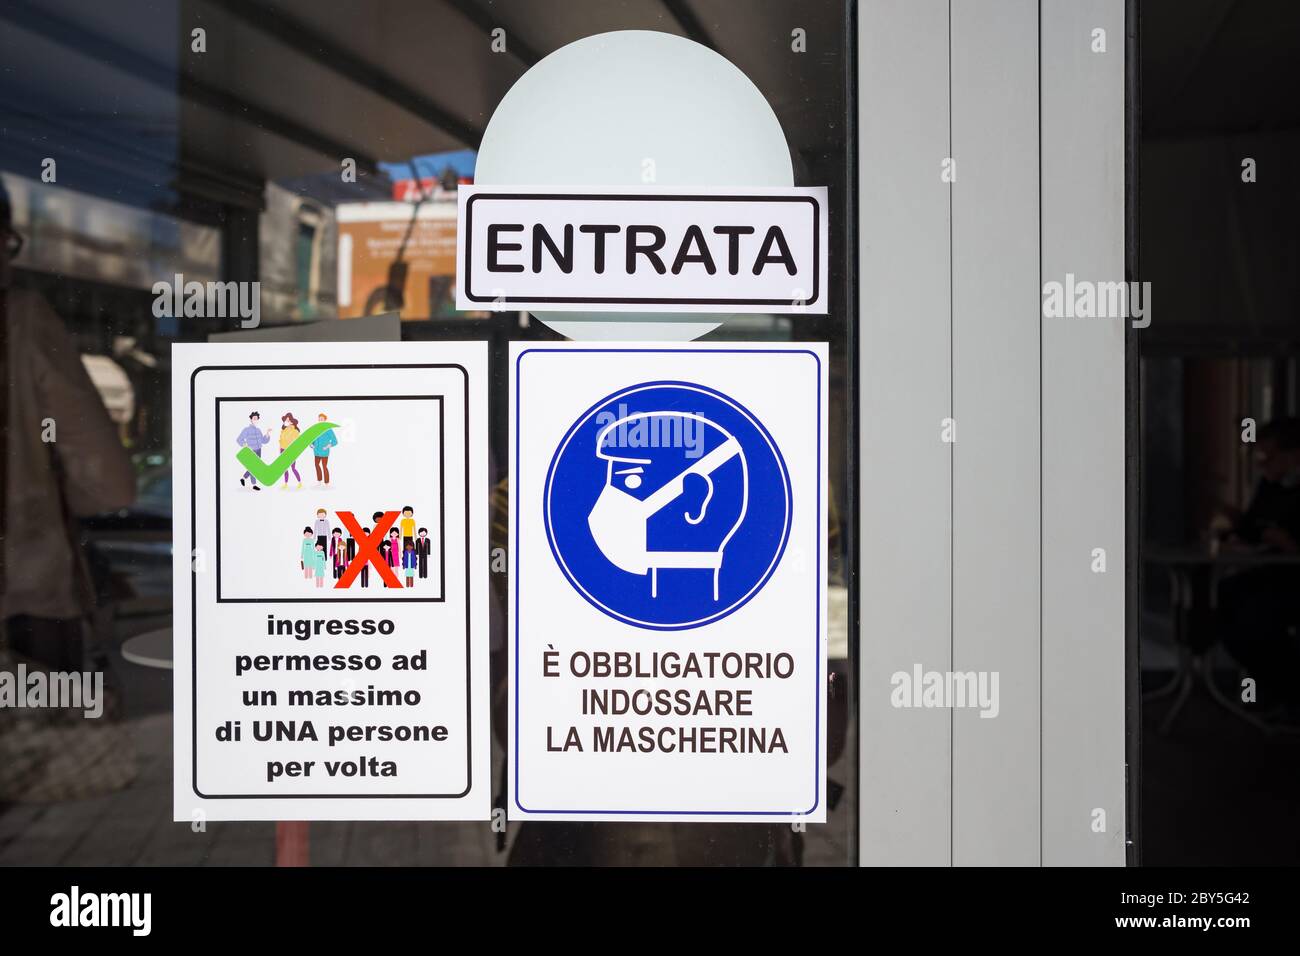 Quarantine messages on the door of cafe in Sicily, Italy Stock Photo